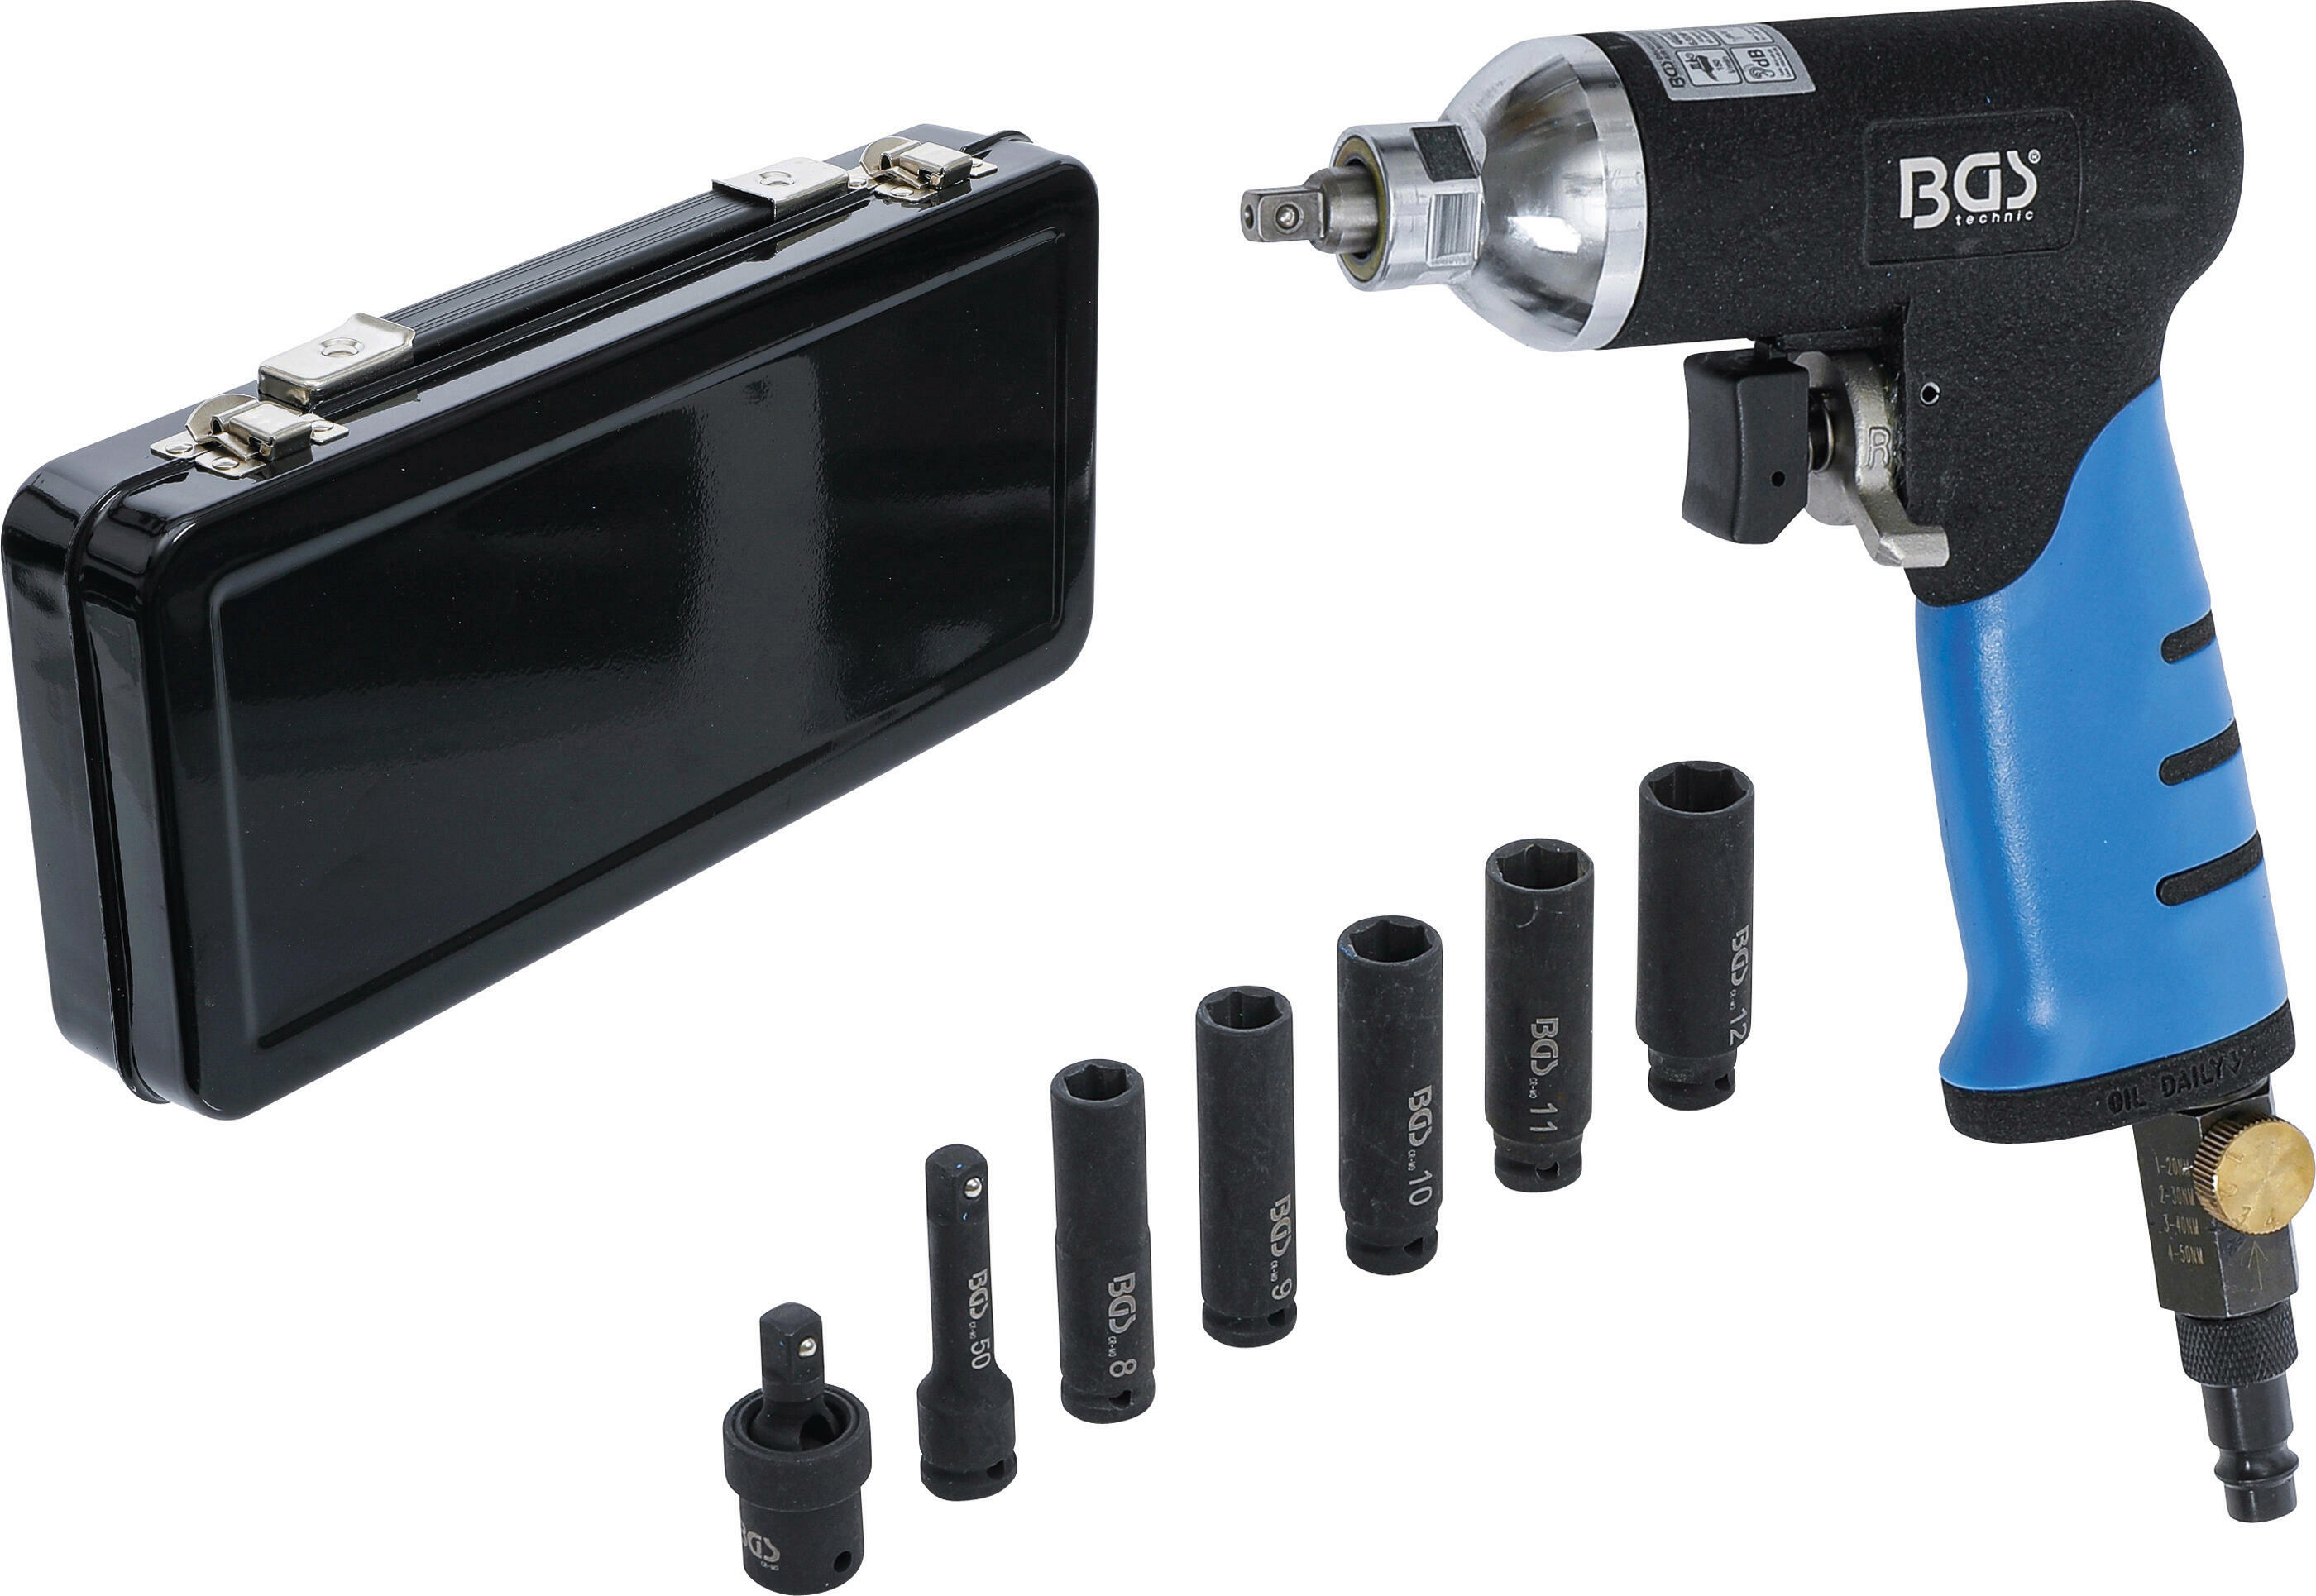 BGS Impact Wrench (compressed air)